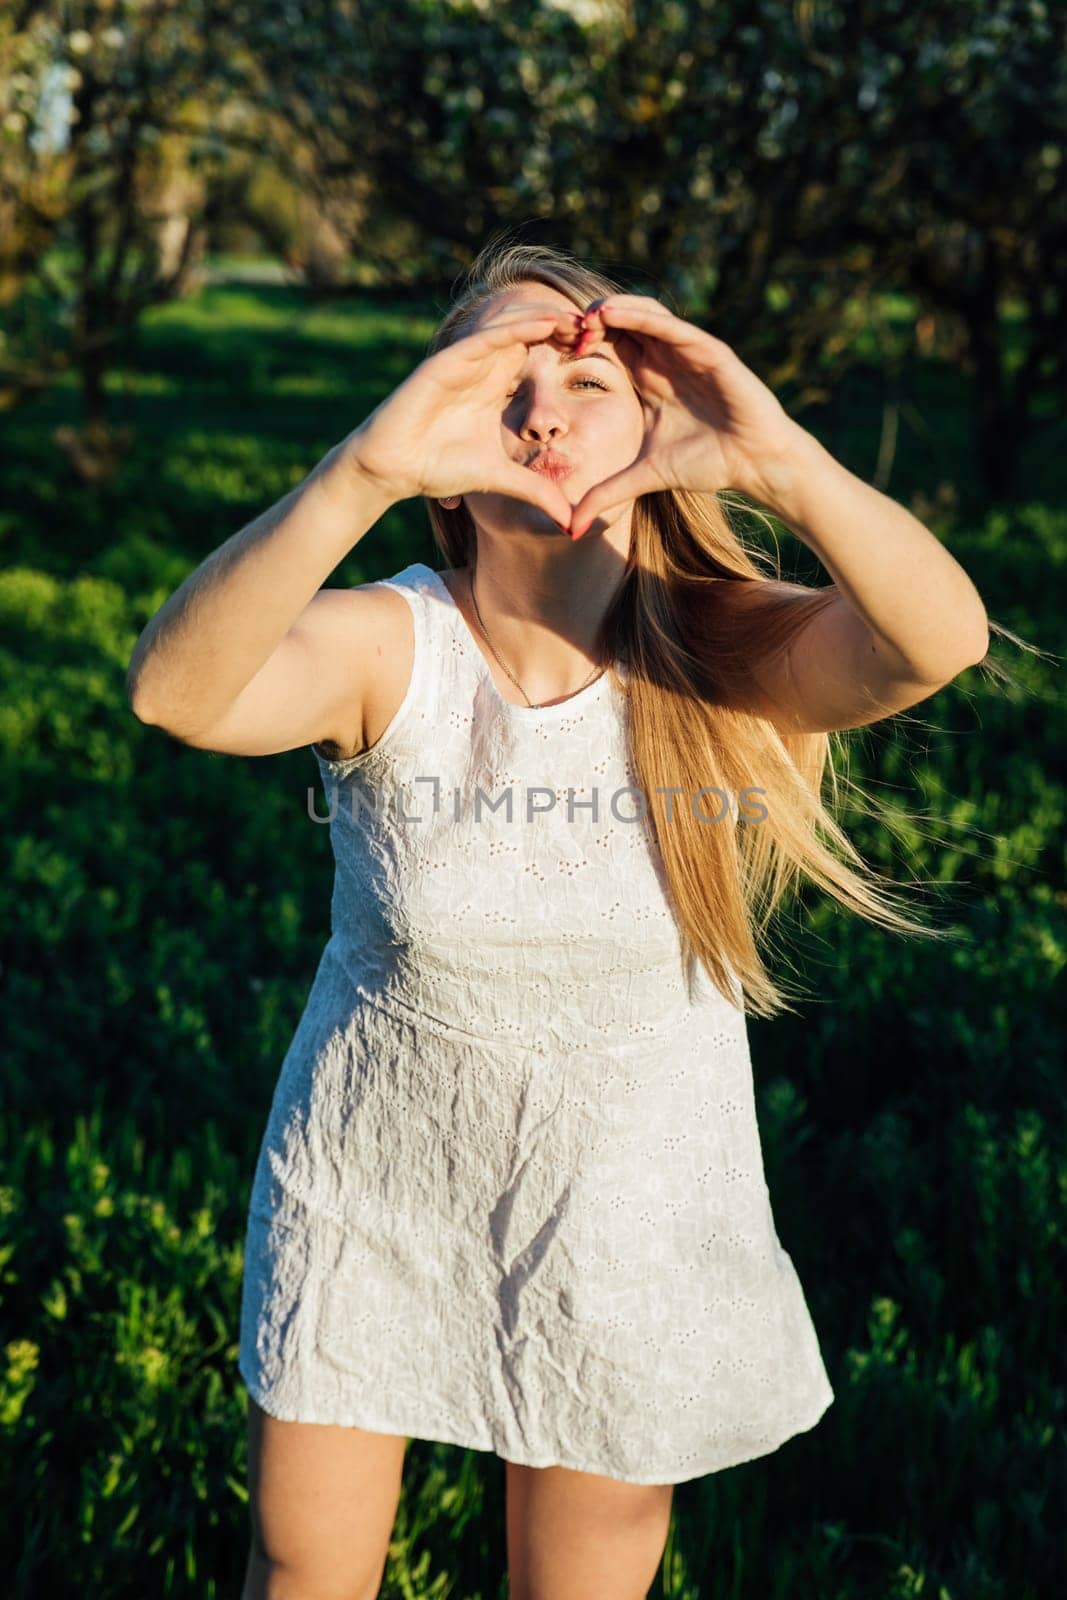 Beautiful woman shows heart in park walk nature by Simakov